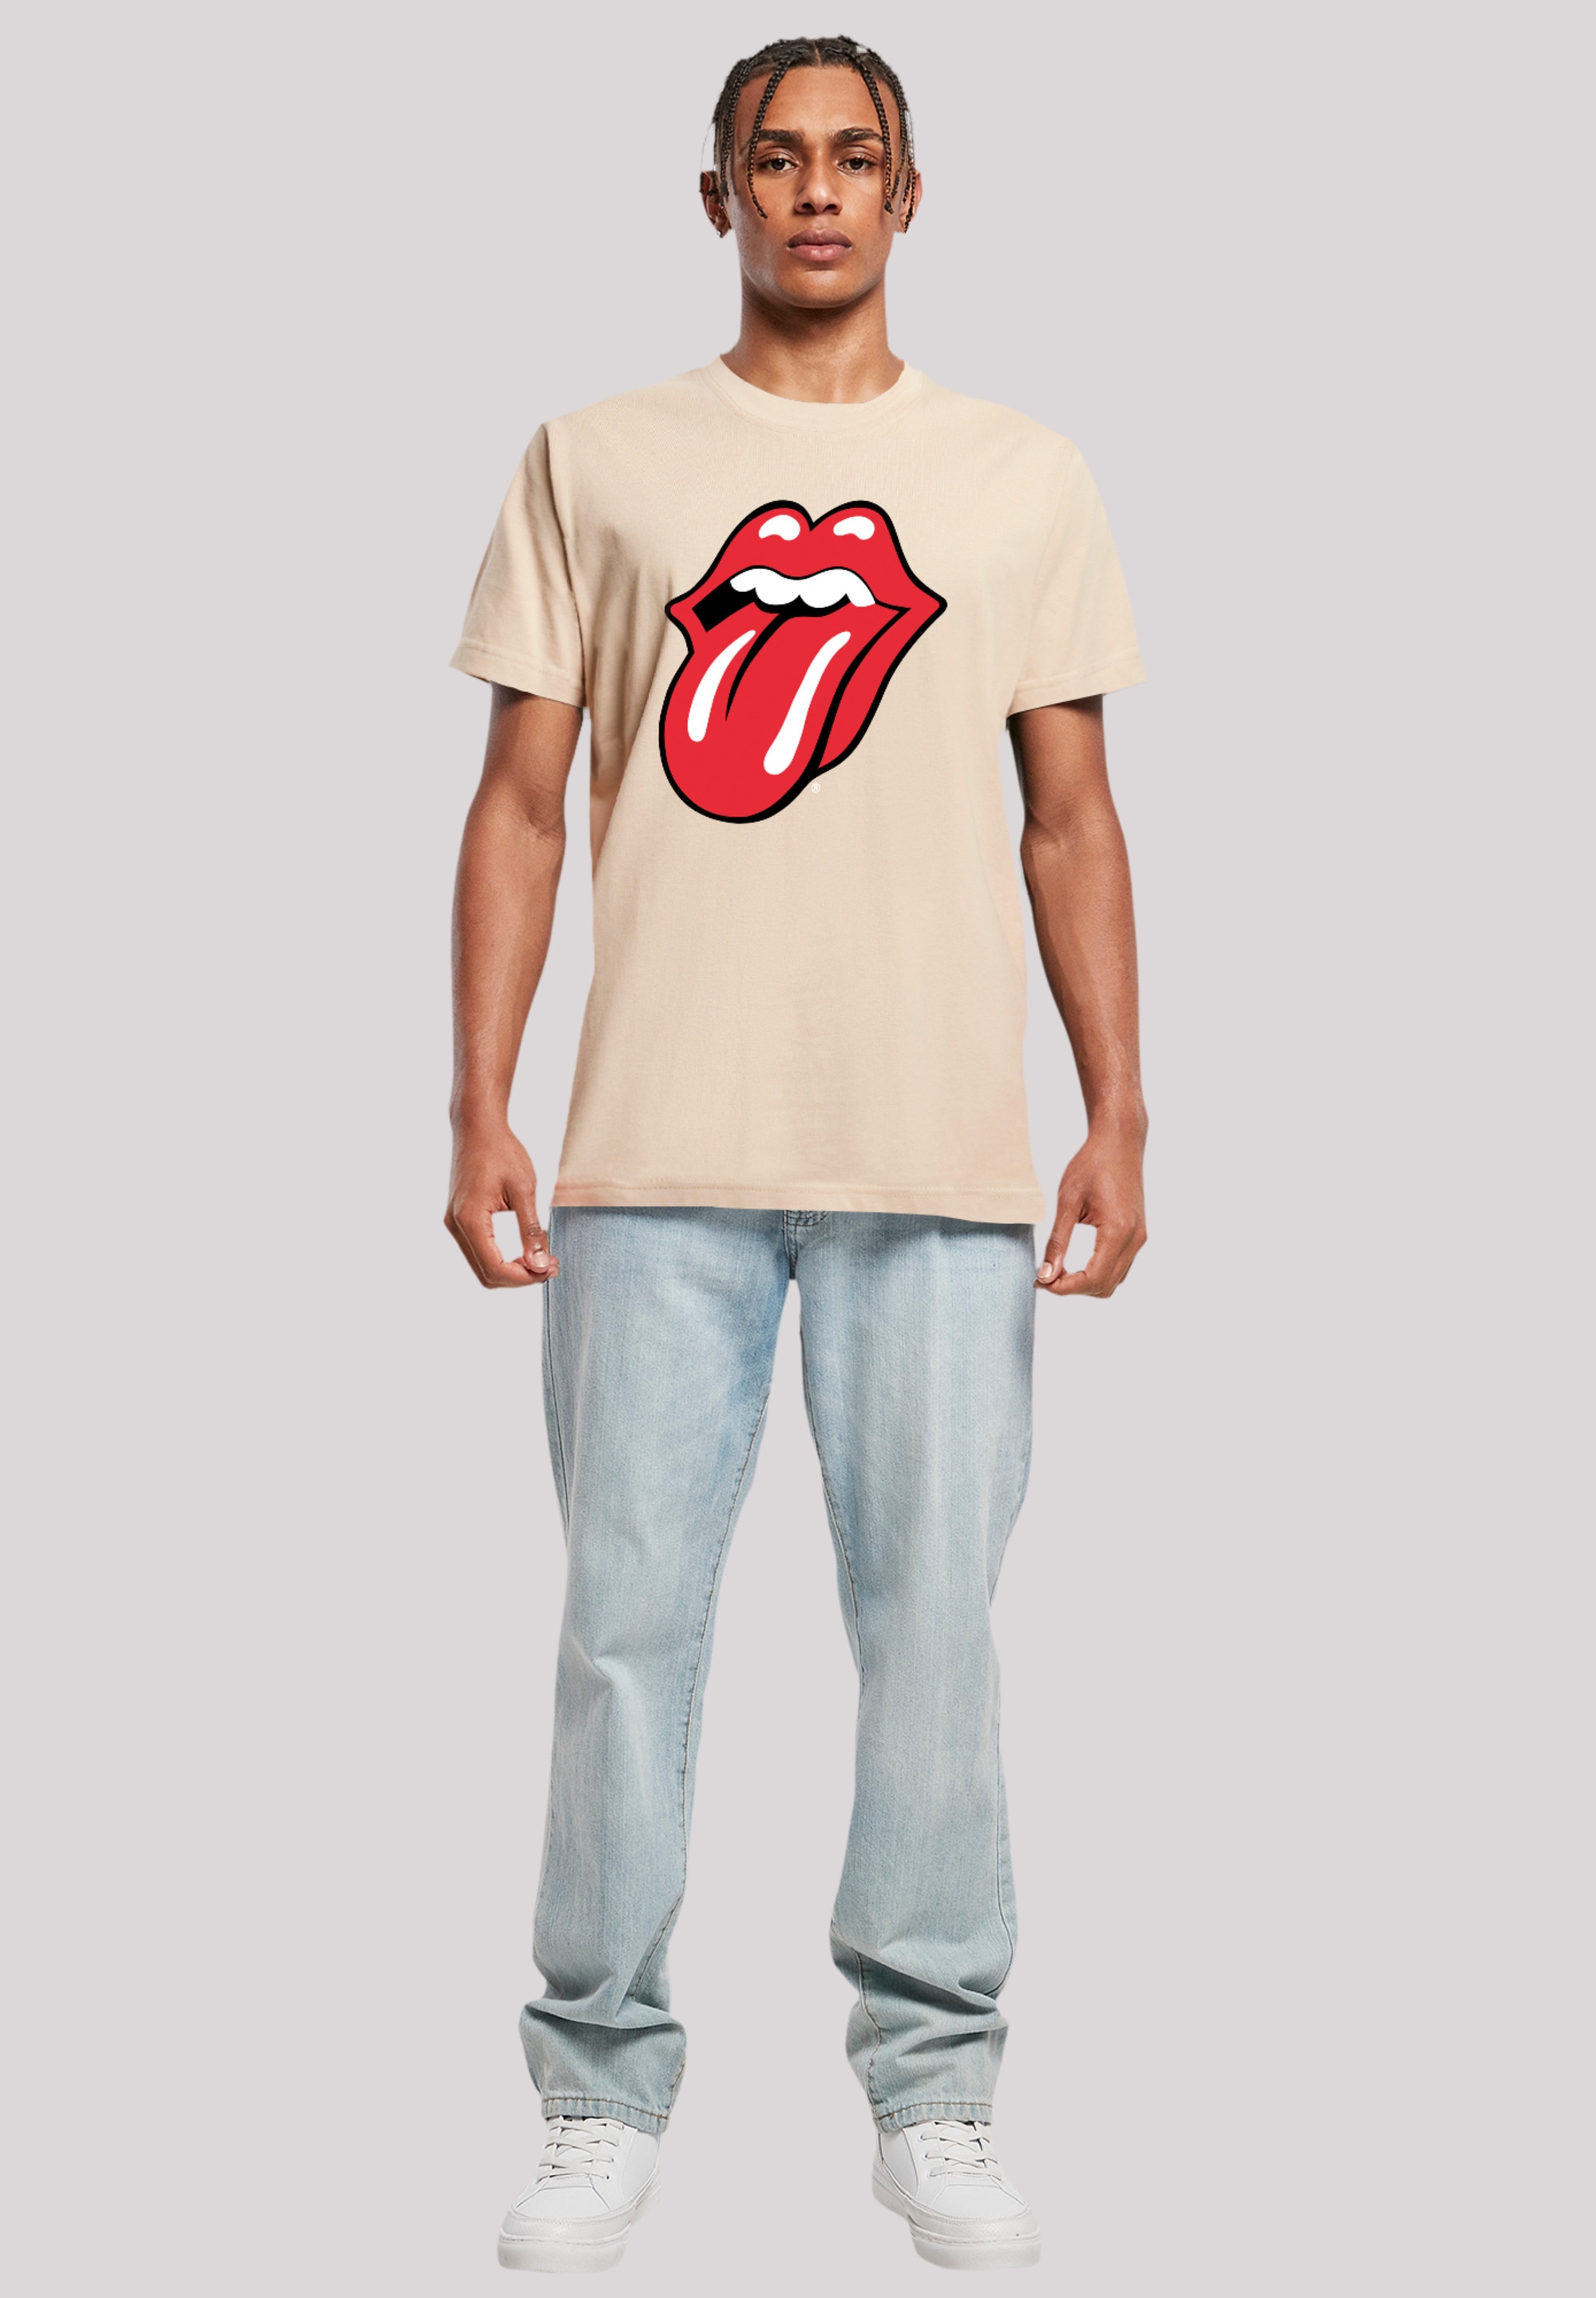 Print T-Shirt Rolling bestellen Stones F4NT4STIC »The Zunge«, Rote